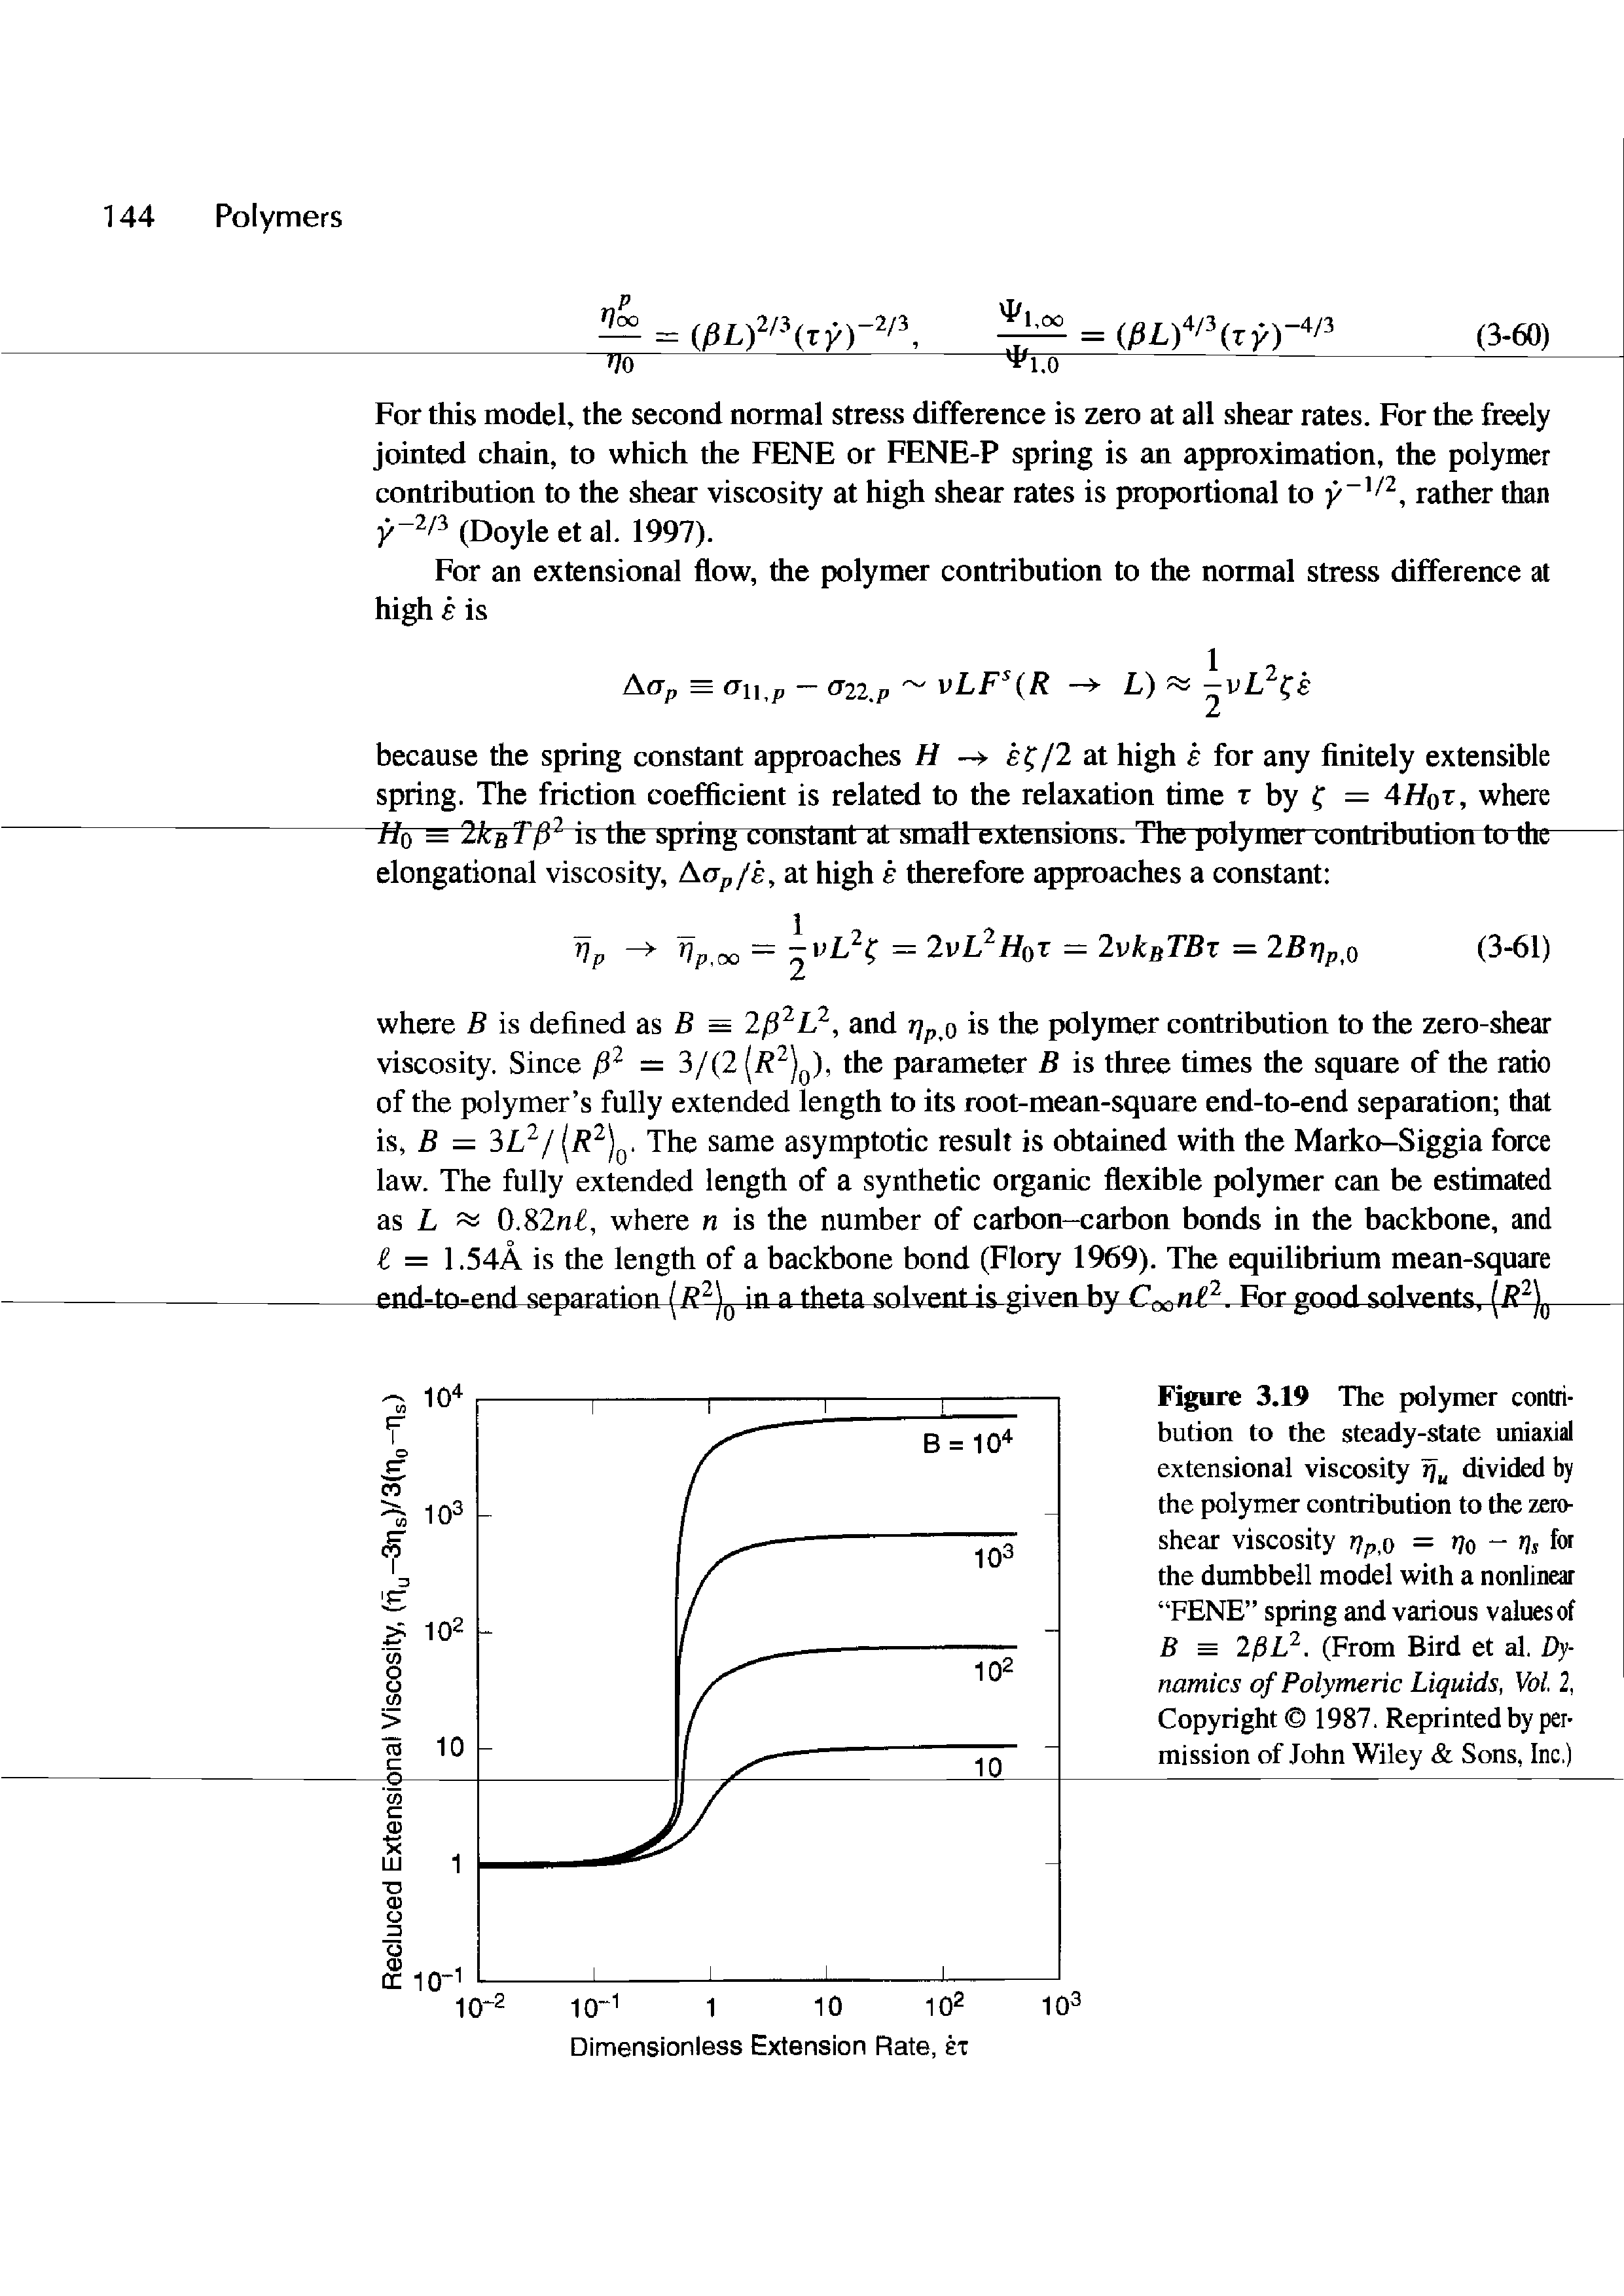 Figure 3.19 The polymer contribution to the steady-state uniaxial extensional viscosity r divided by the polymer contribution to the zero-shear viscosity rjp = r/o — fjj for the dumbbell model with a nonlinear FENE spring and various values of B = ipL. (From Bird et al. Dynamics of Polymeric Liquids, Vol. 2, Copyright 1987. Reprinted by permission of John Wiley Sons, Inc.)...